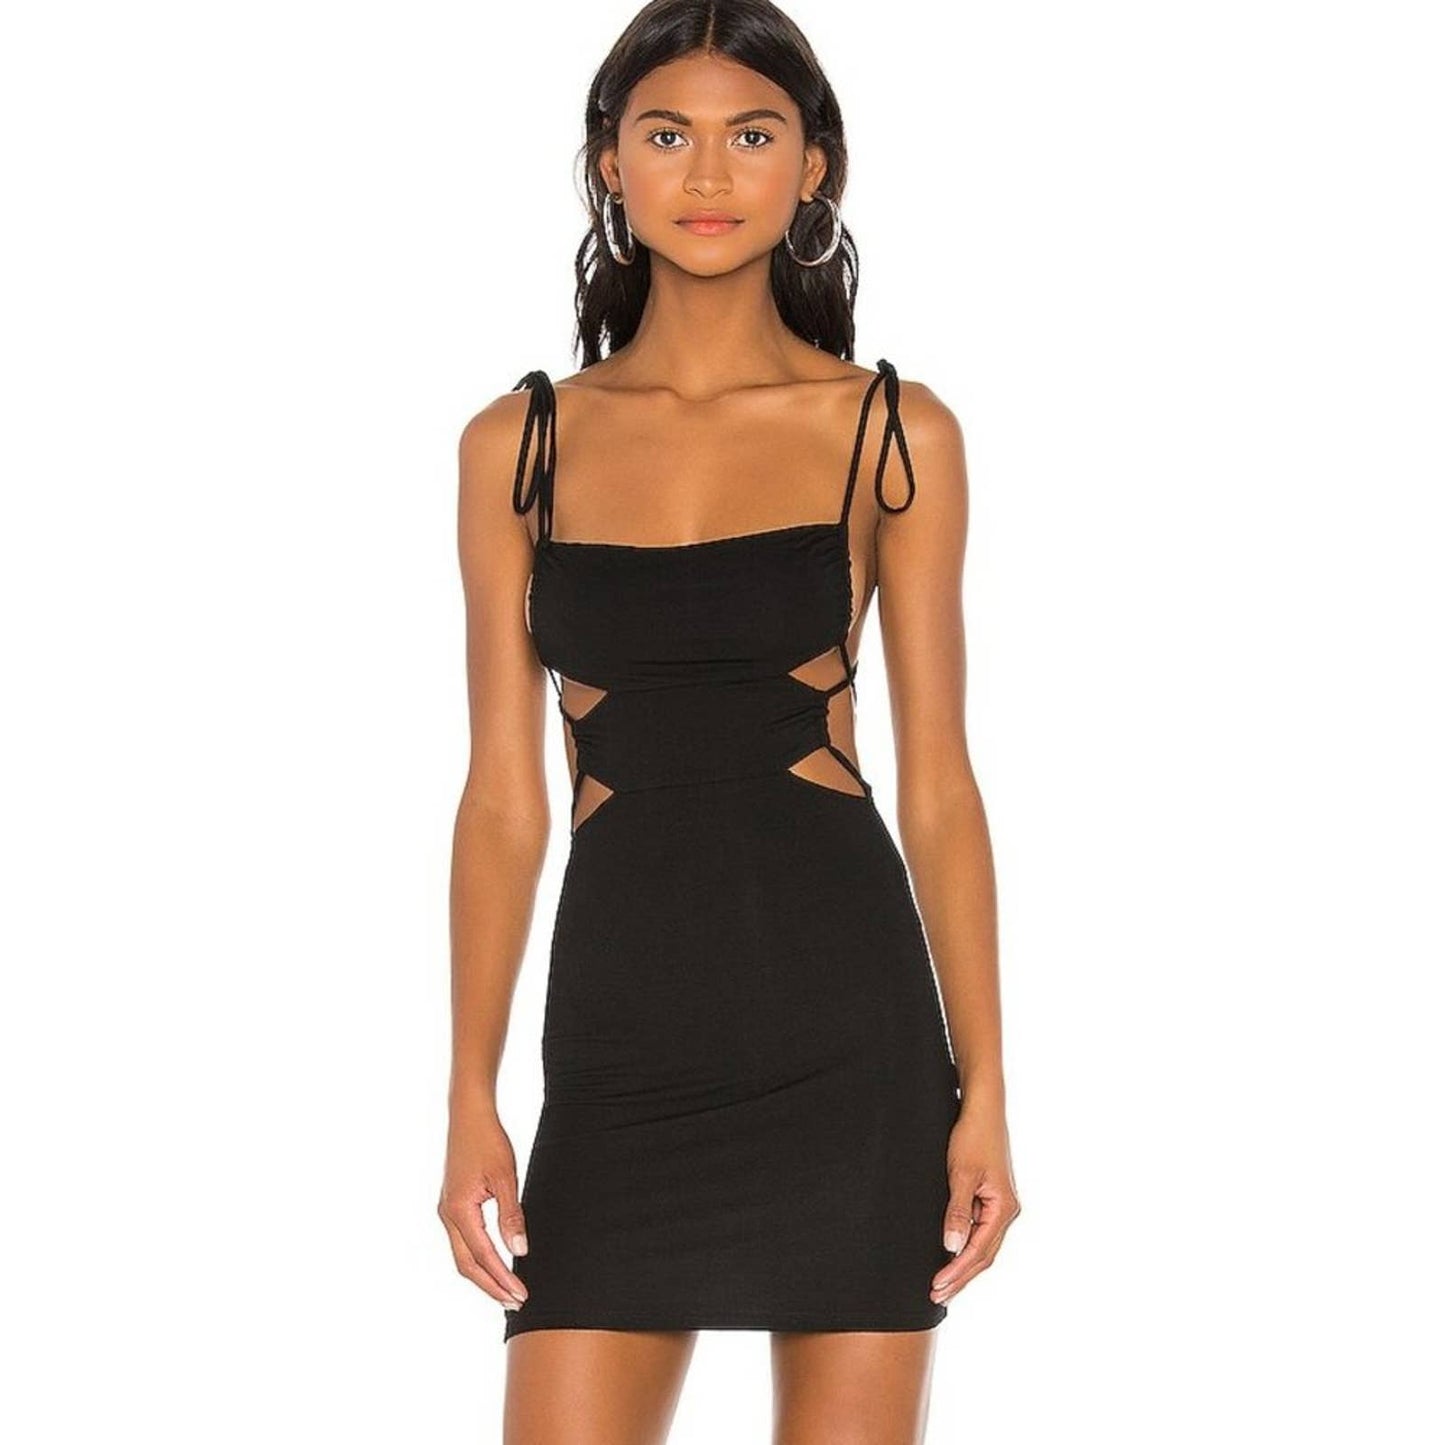 h:ours Montlake Mini Dress in Black NWOT Size M